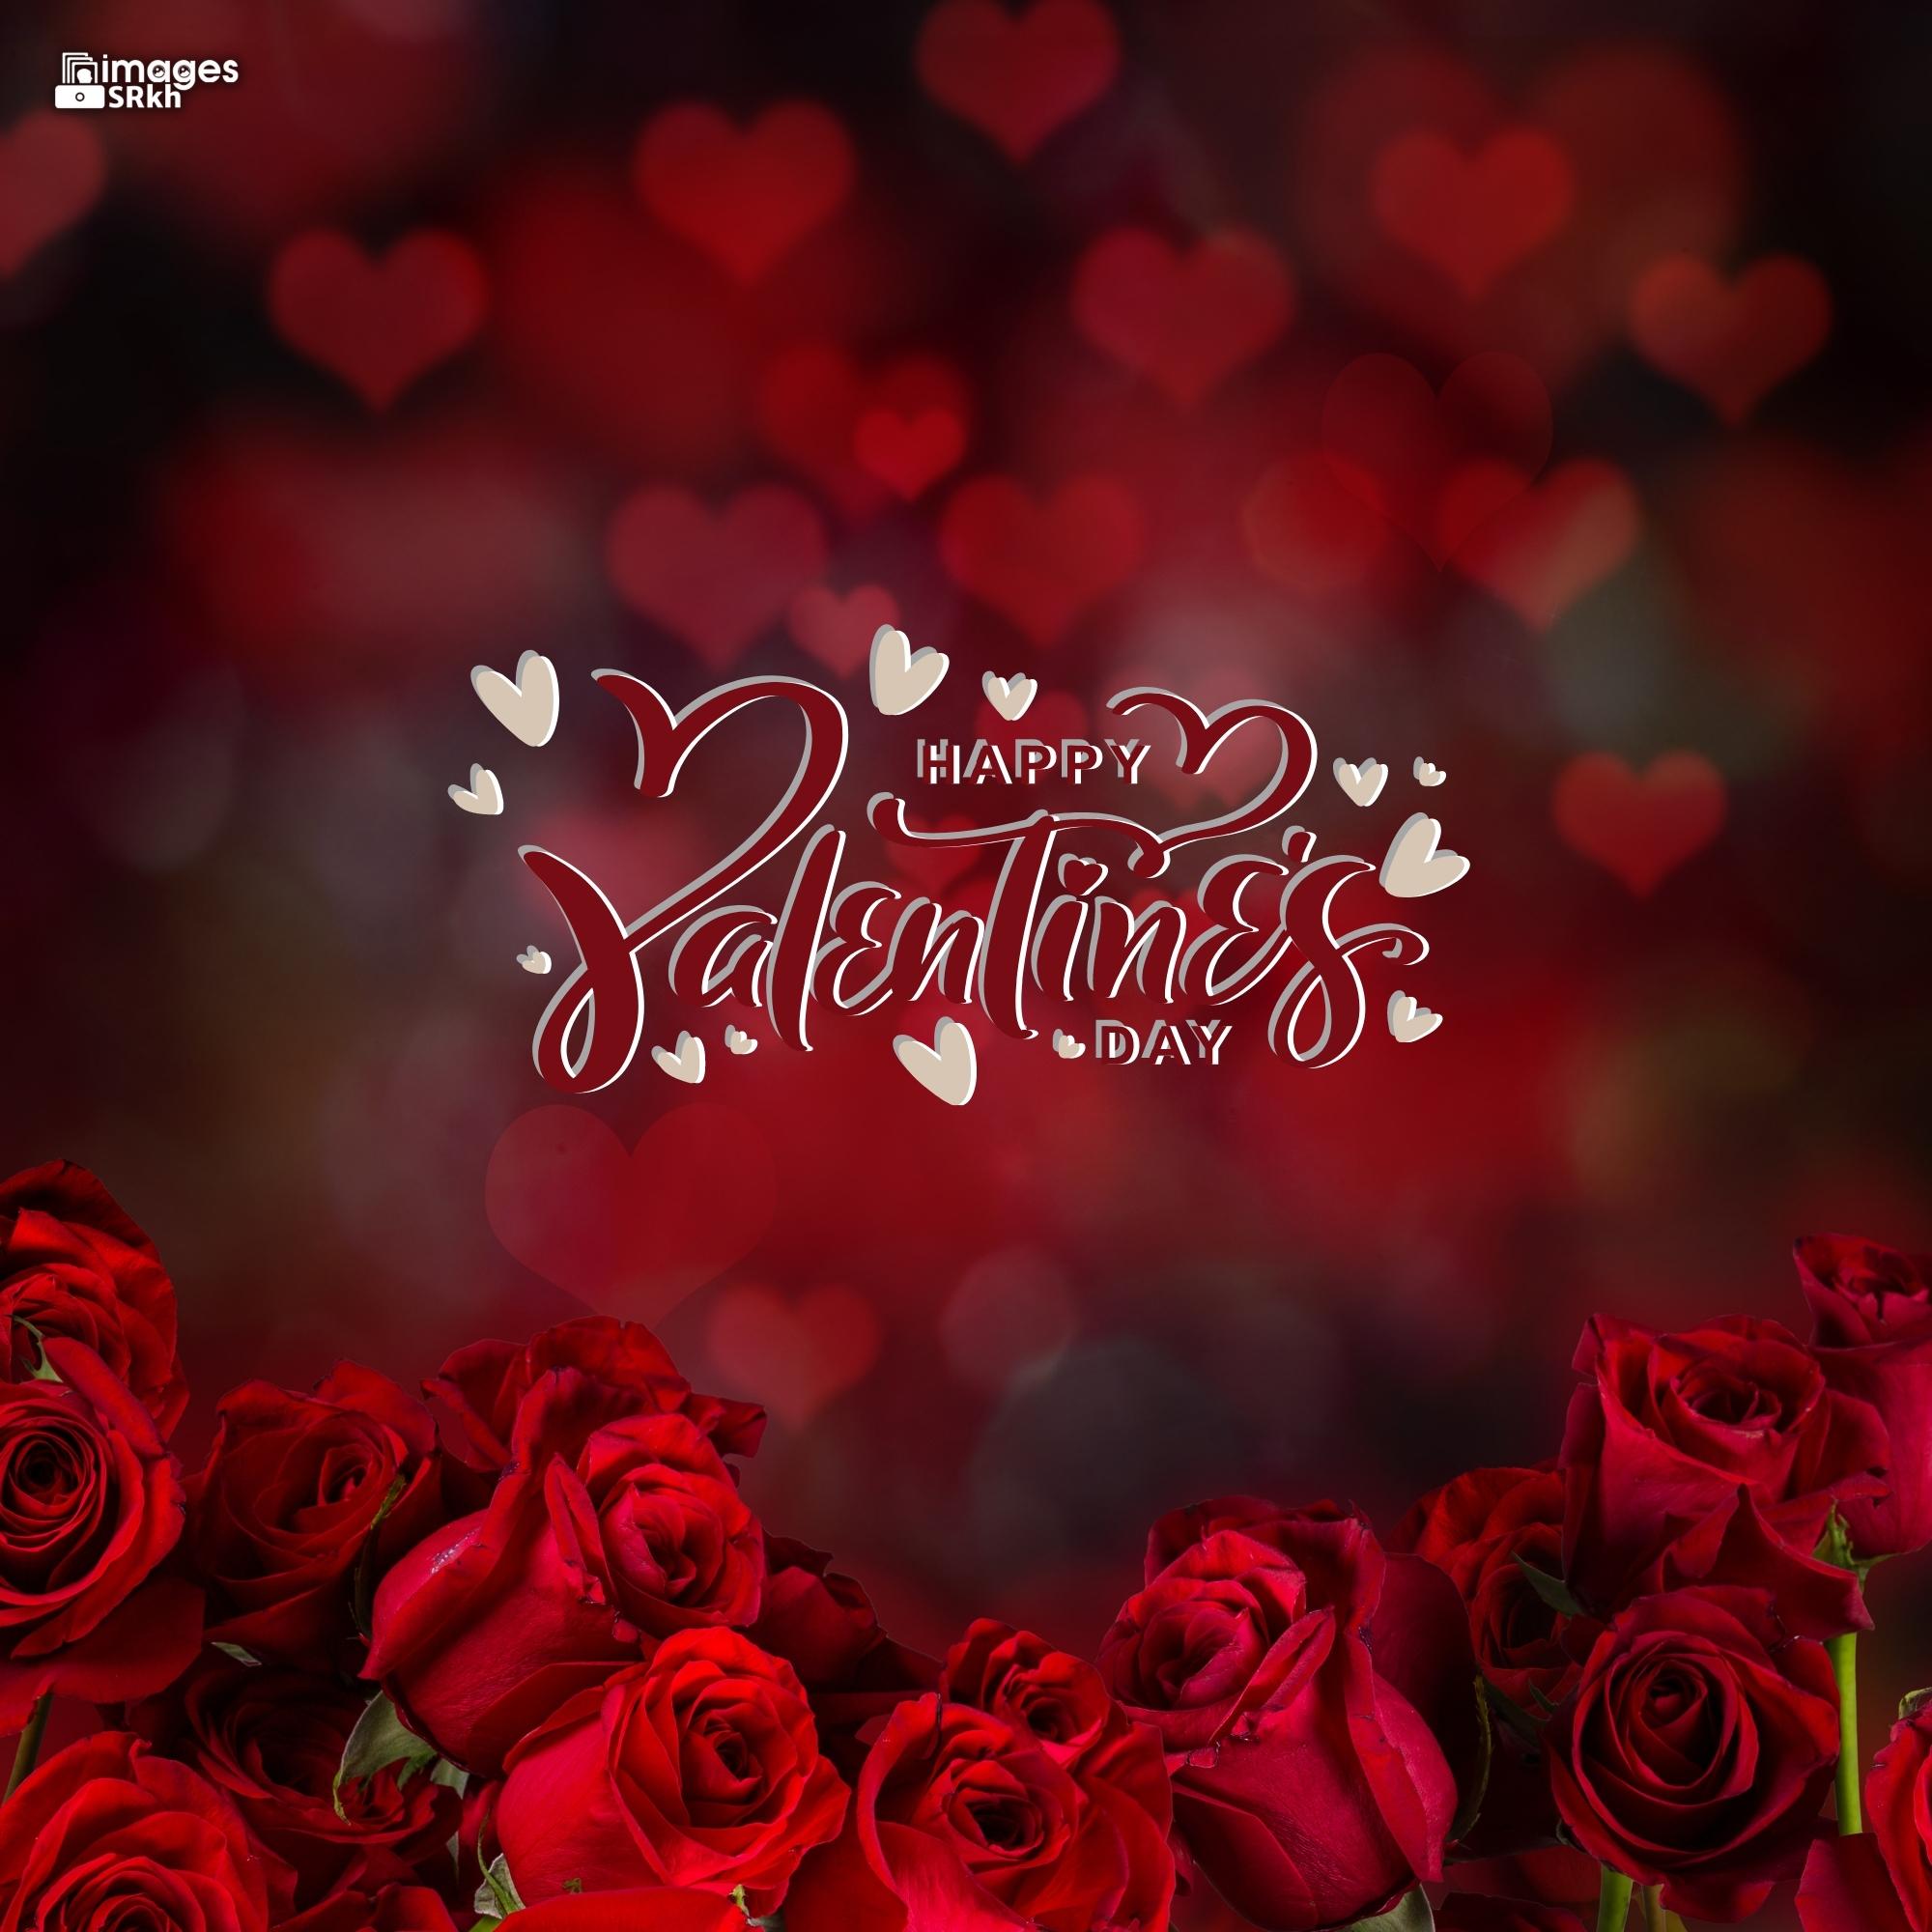 Happy Valentines Day | 451 | PREMIUM IMAGES | Wishes for Love